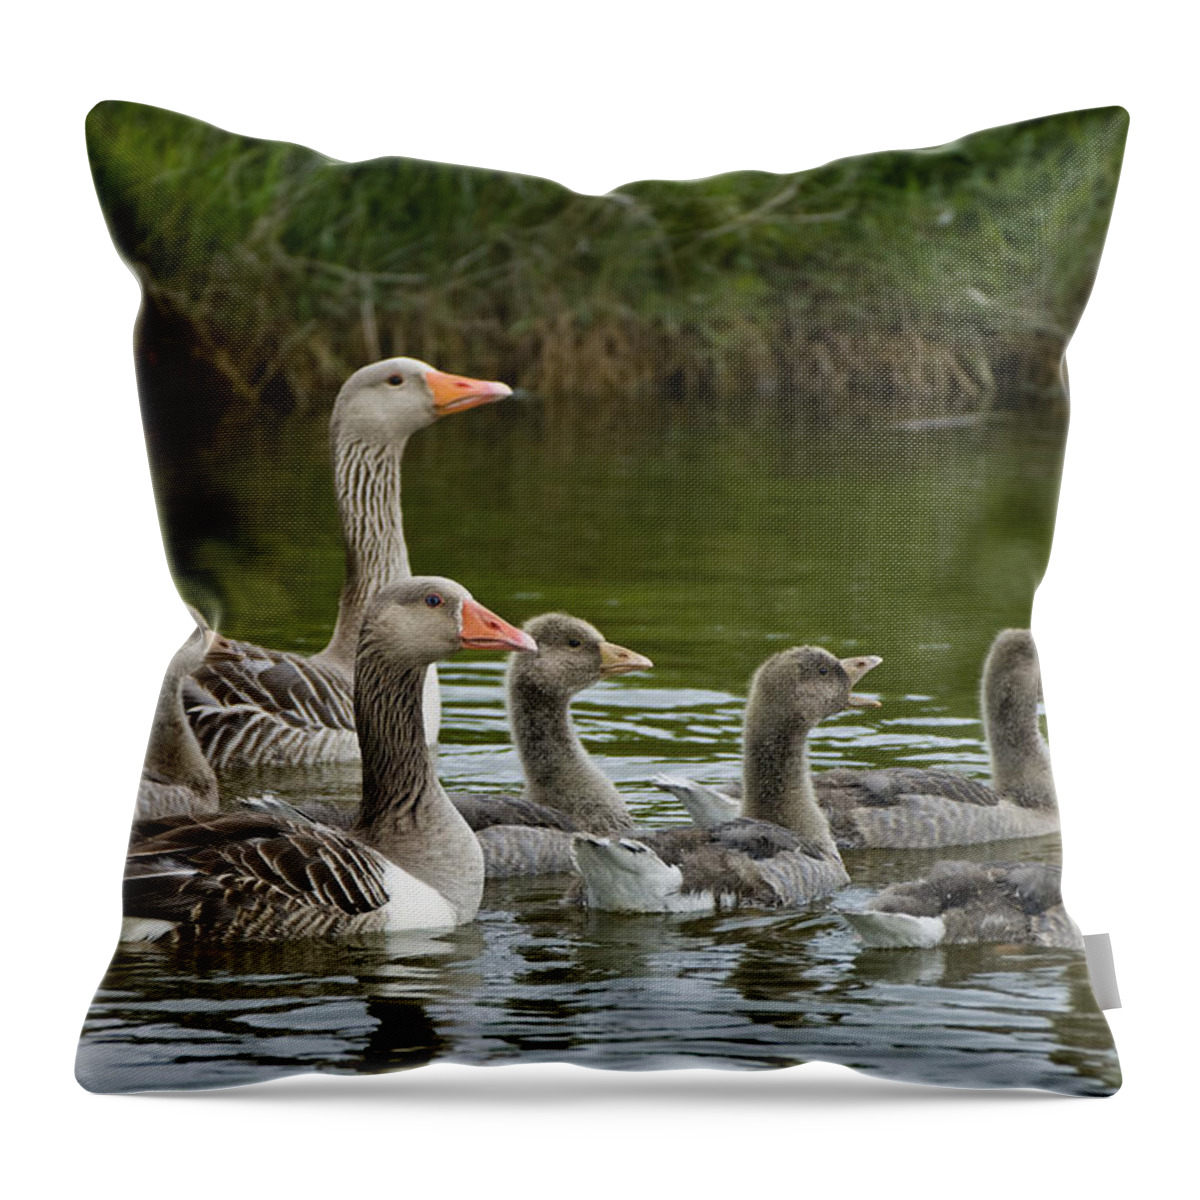 Fn Throw Pillow featuring the photograph Greylag Goose Anser Anser Couple by Willi Rolfes